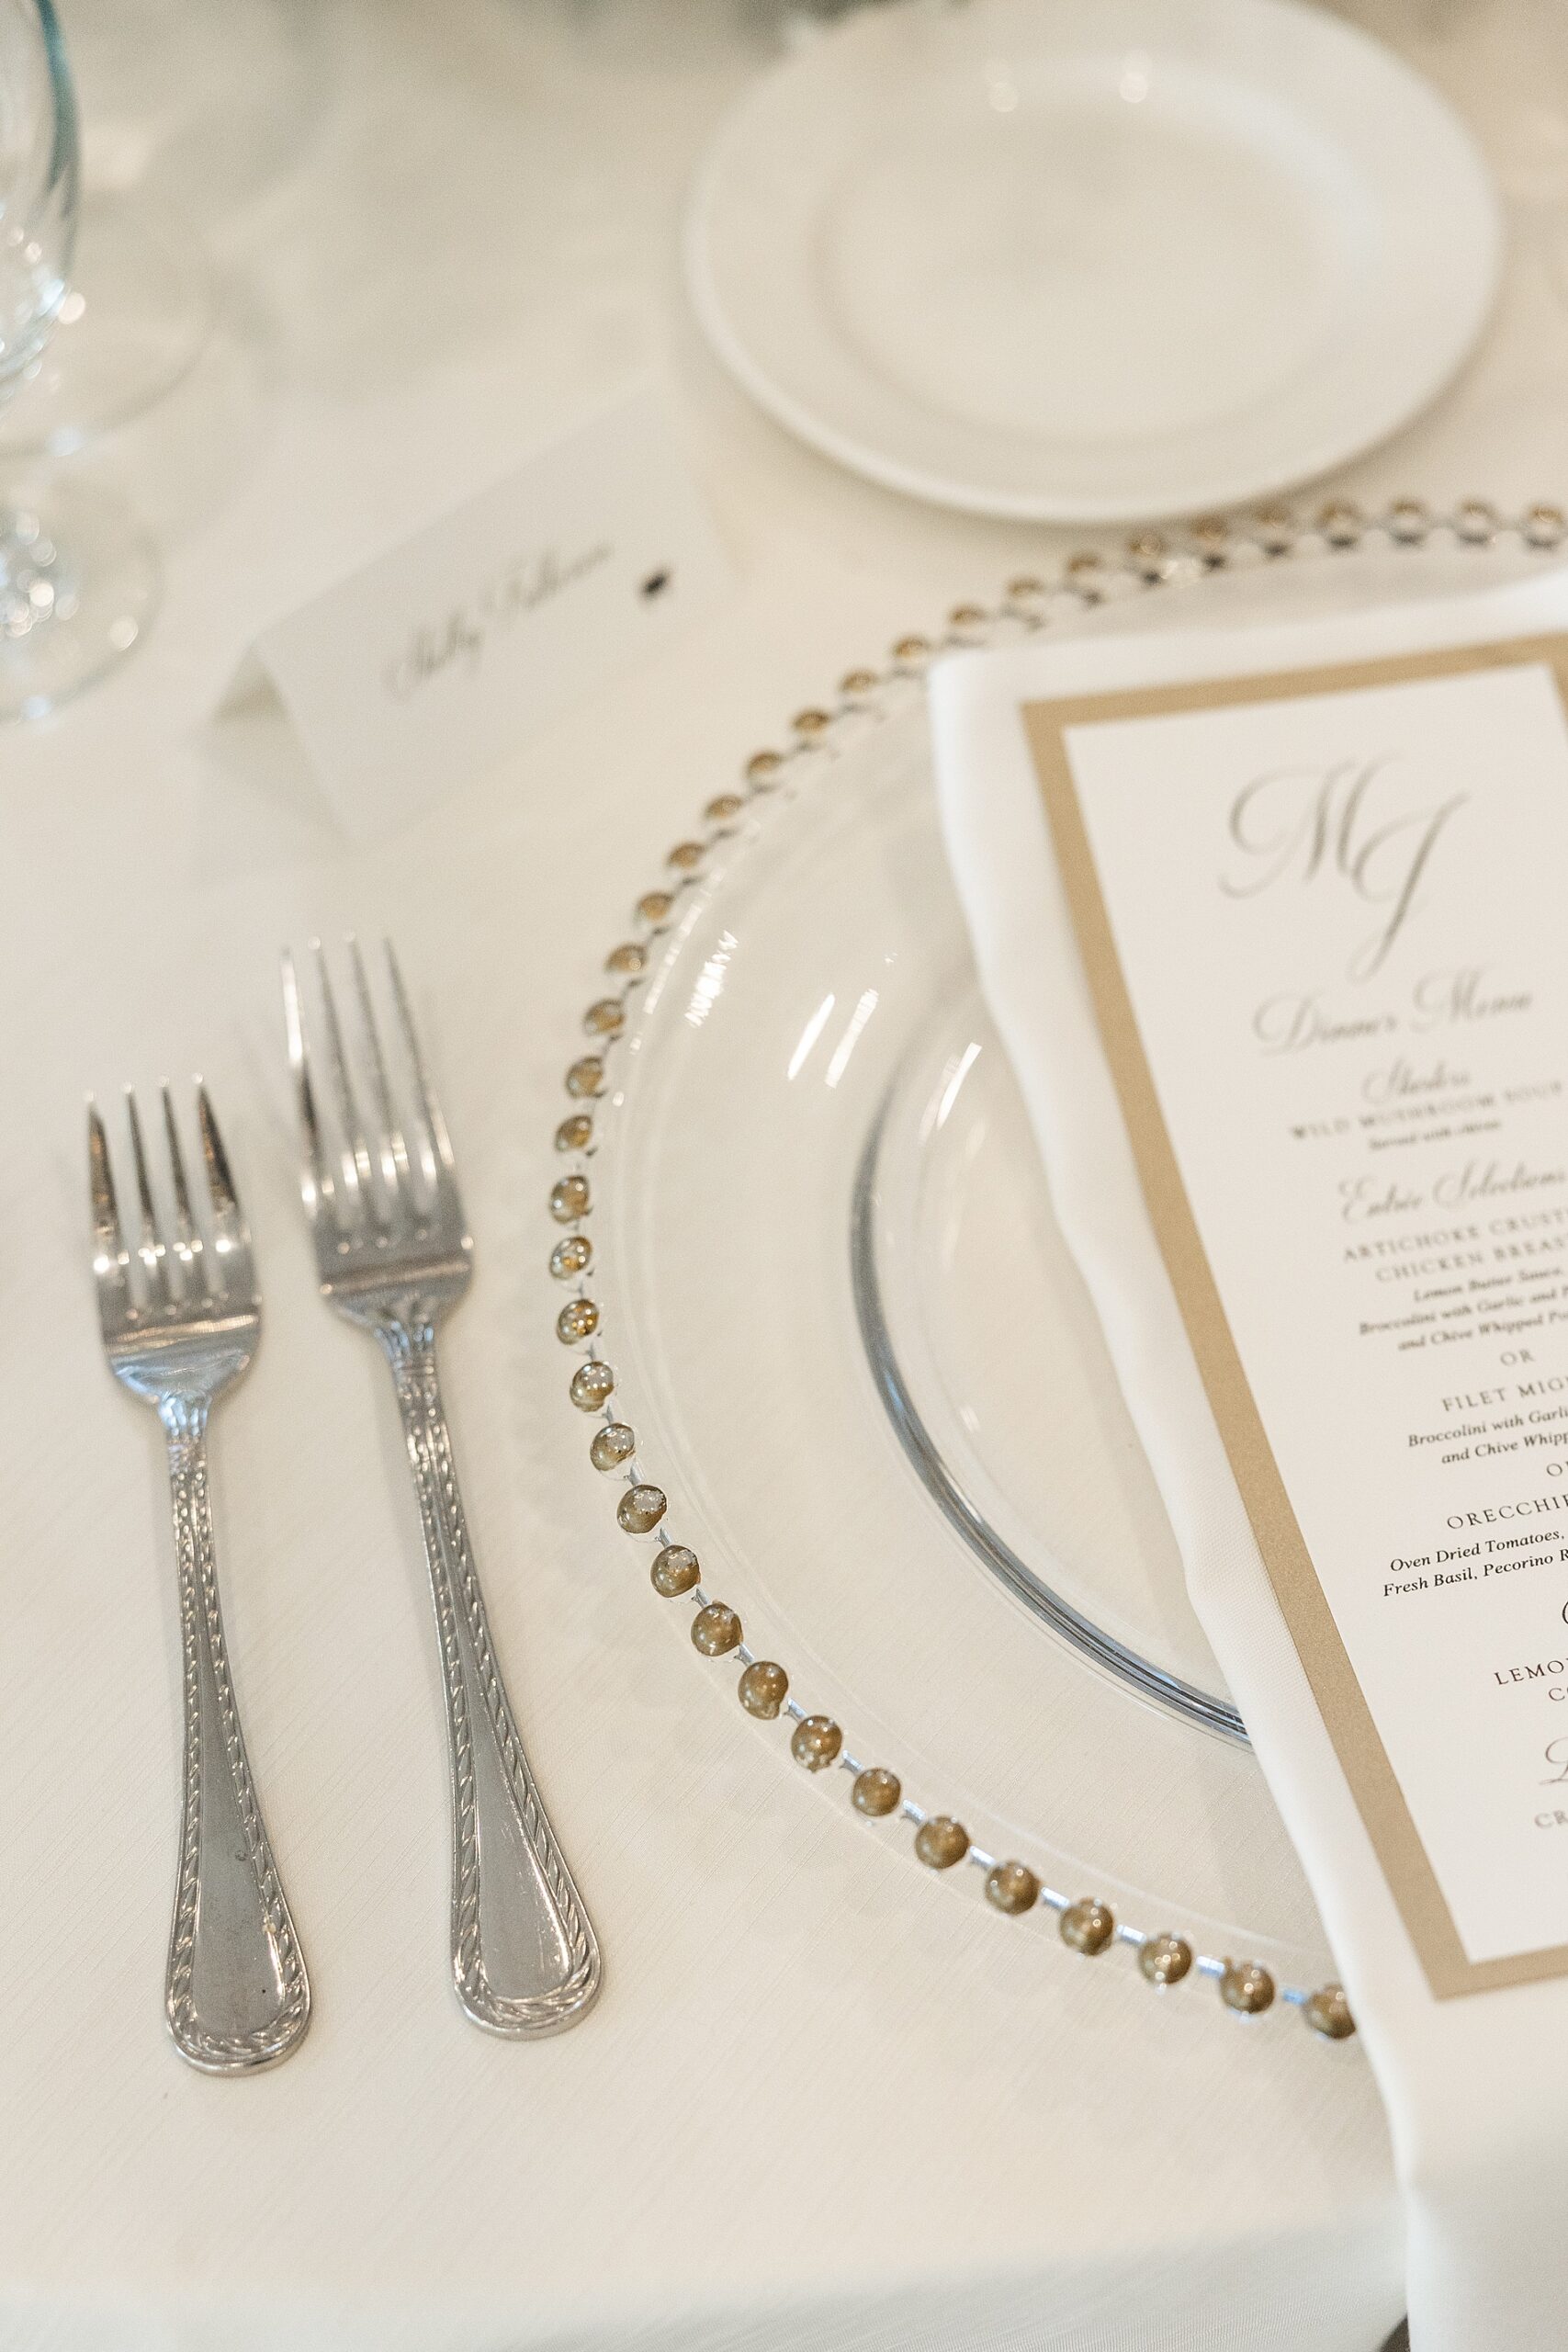 place setting at wedding reception